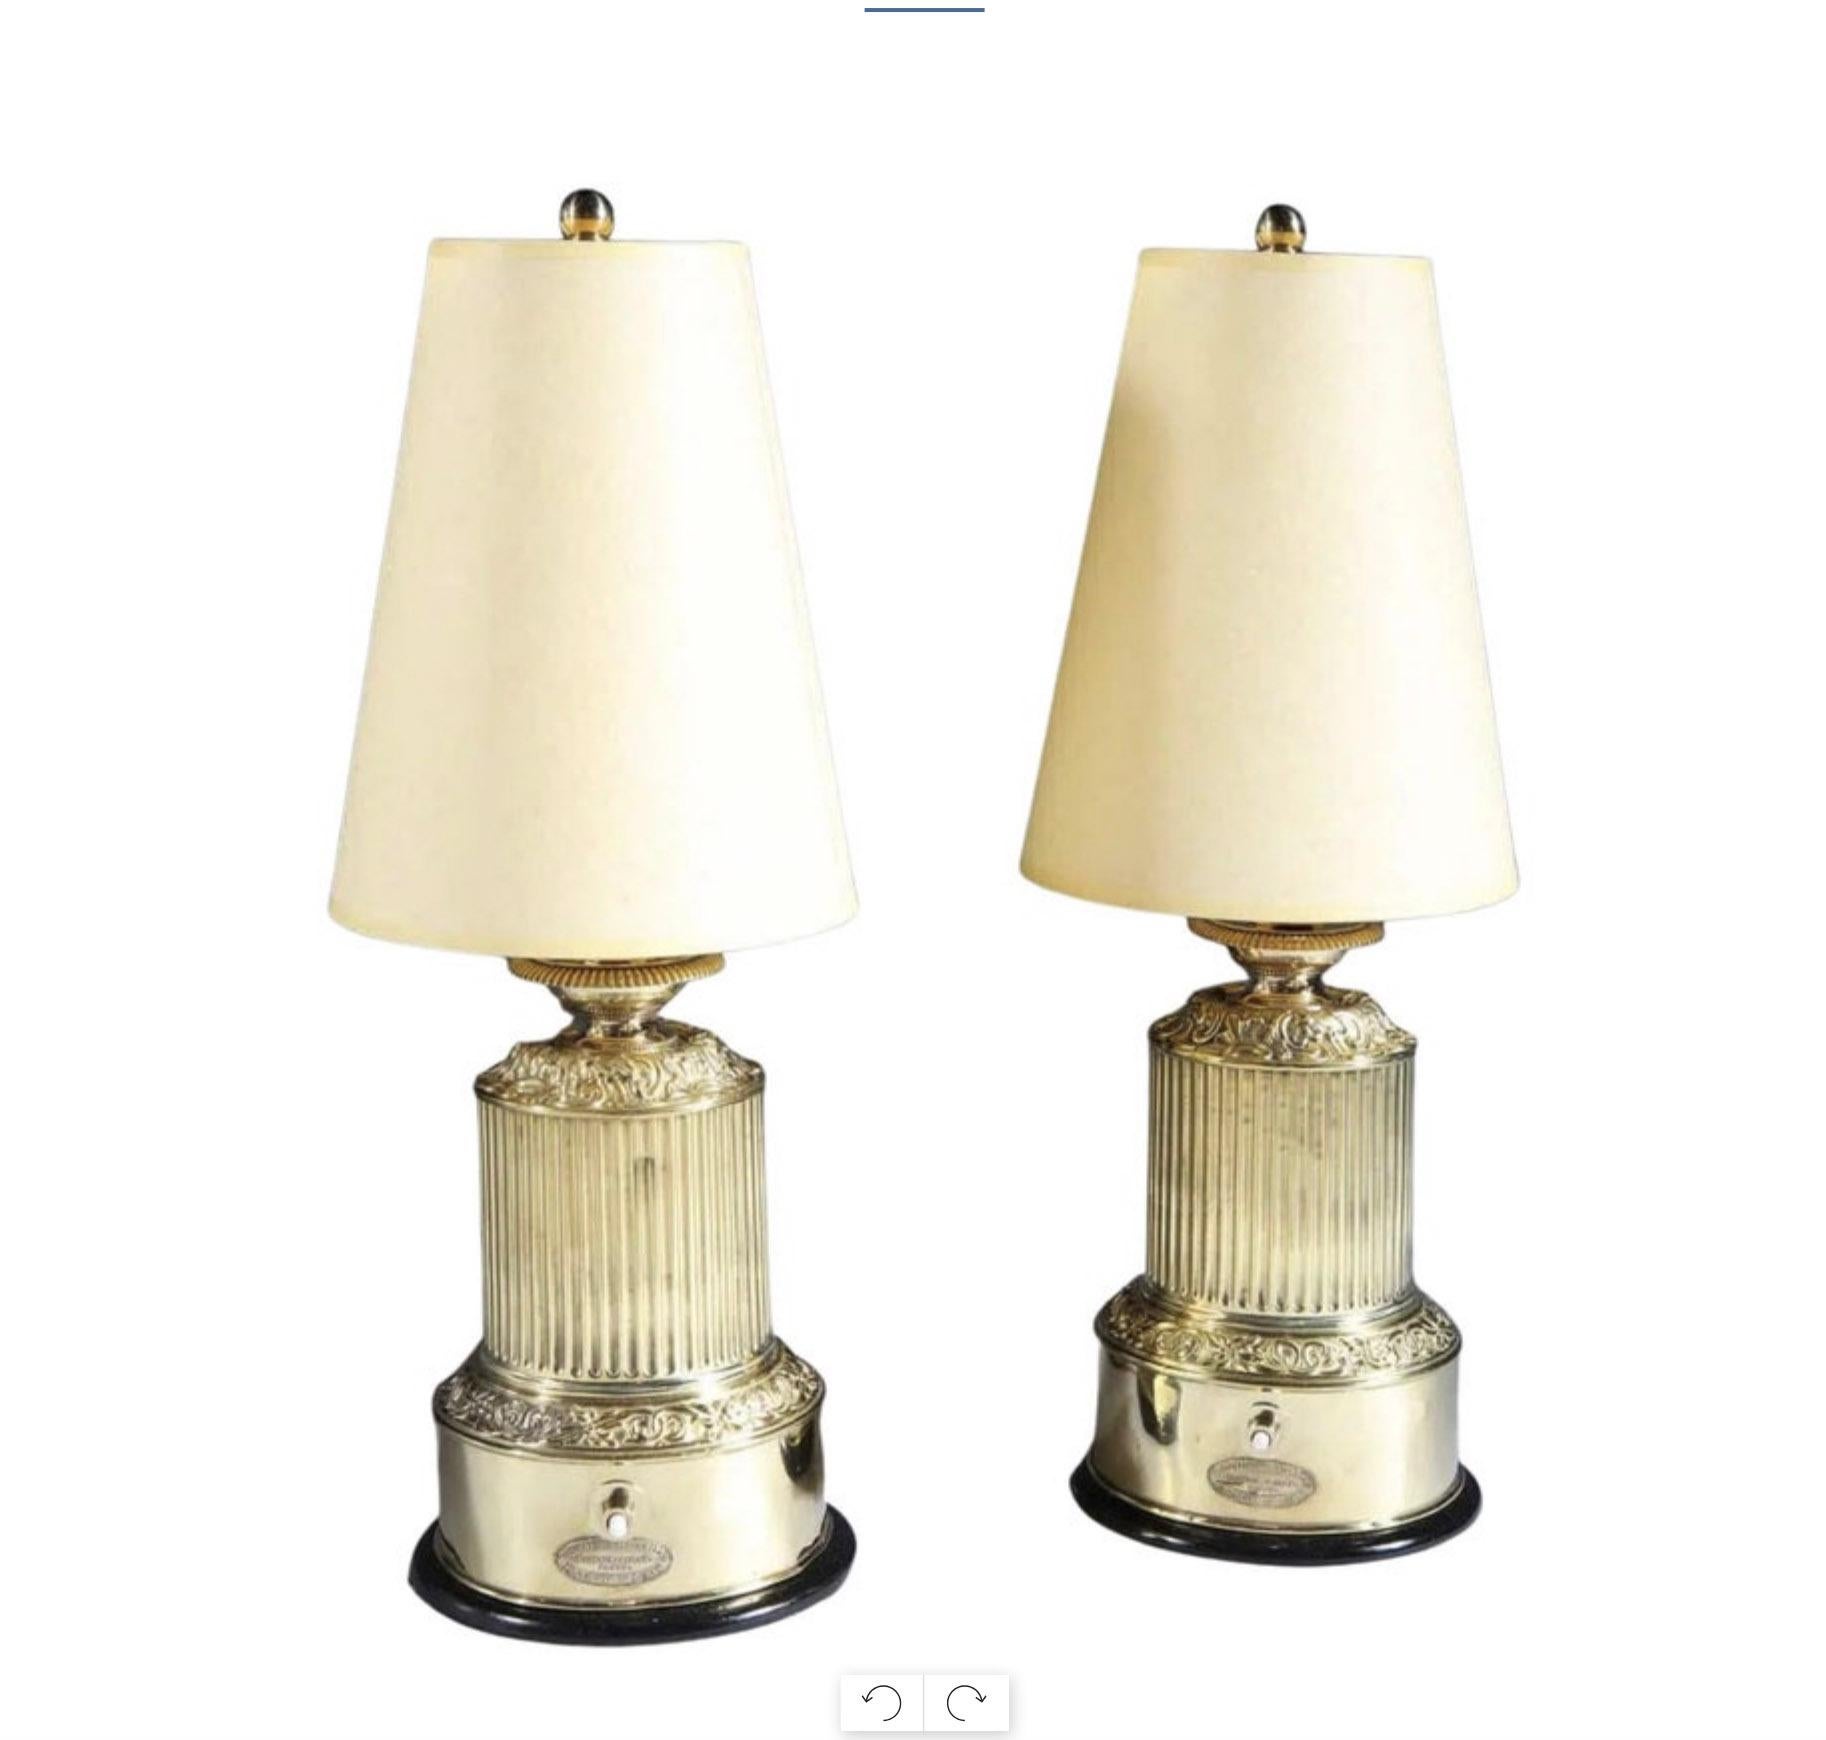 Charles X Pair of French Polished Brass Antique Table Lamps, 19th Century For Sale